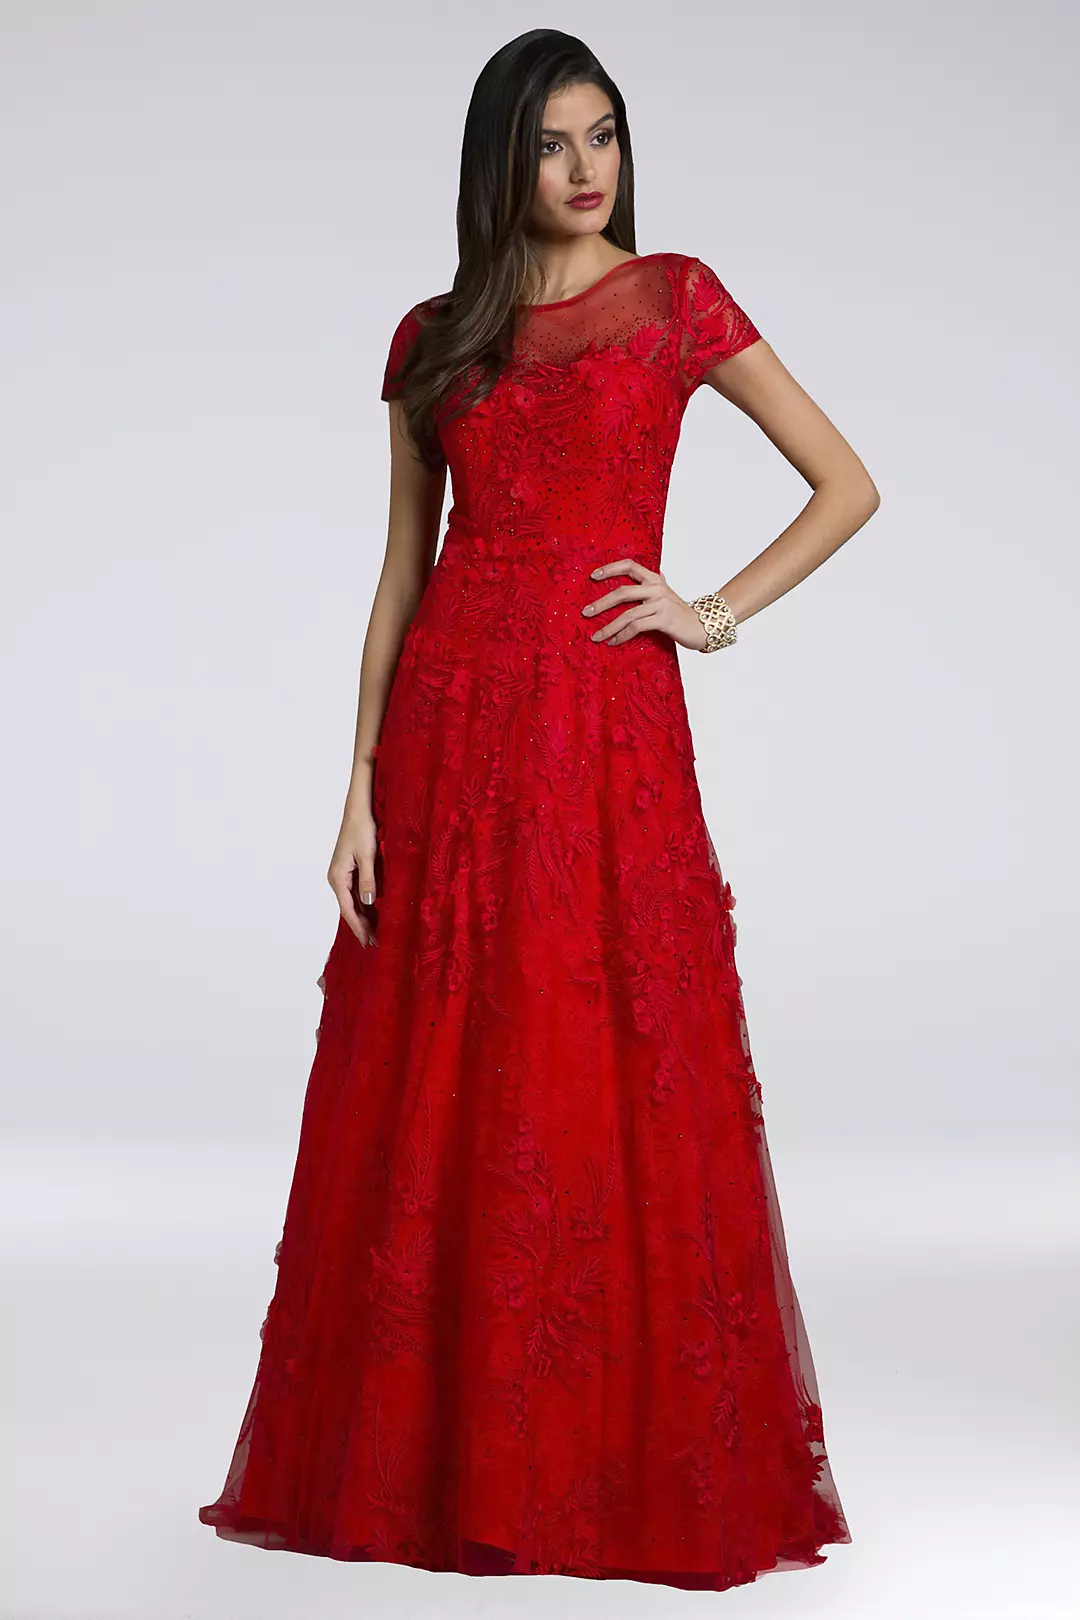 Lara Arissa Short Sleeve Floral Lace Ball Gown Image